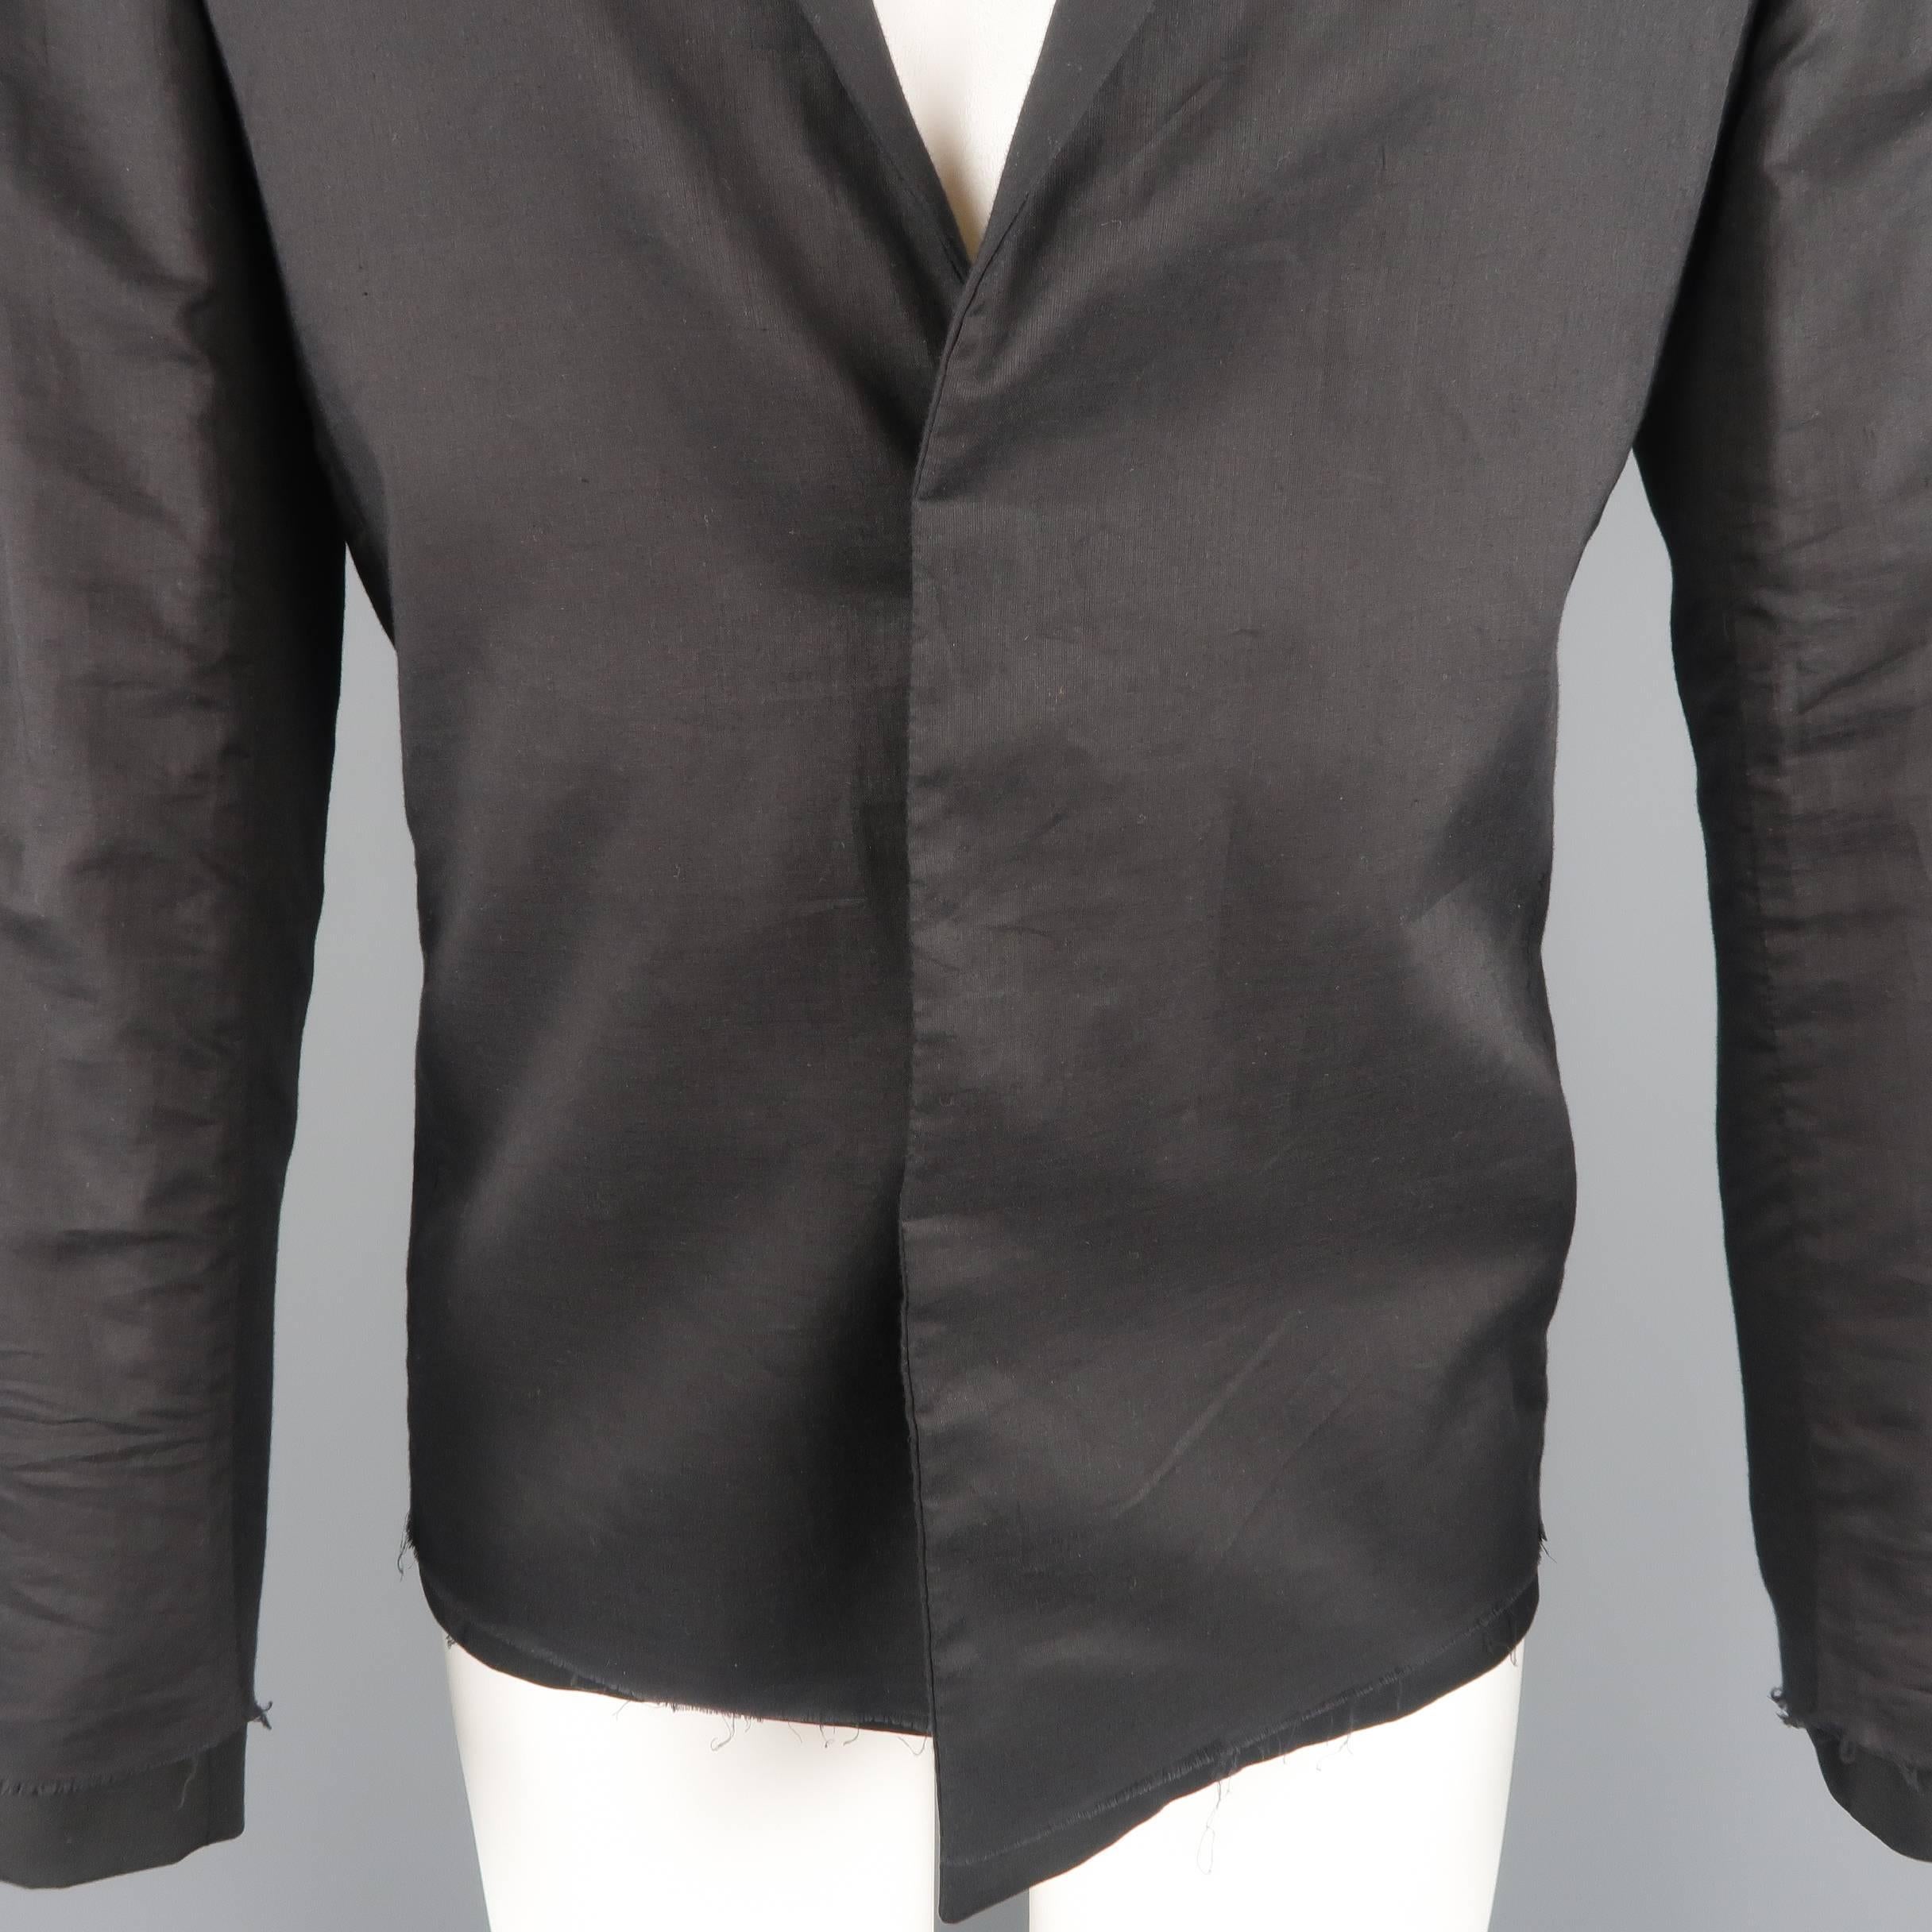 KRIS VAN ASSCHE sport coat comes in black wool with a raw frayed edge gauze overlay, two button front, and notch lapel. Made in Italy.
 
New with Tags.
Marked: IT 46
 
Measurements:
 
Shoulder: 17 in.
Chest: 40 in,
Sleeve: 26 in.
Length: 30 in.